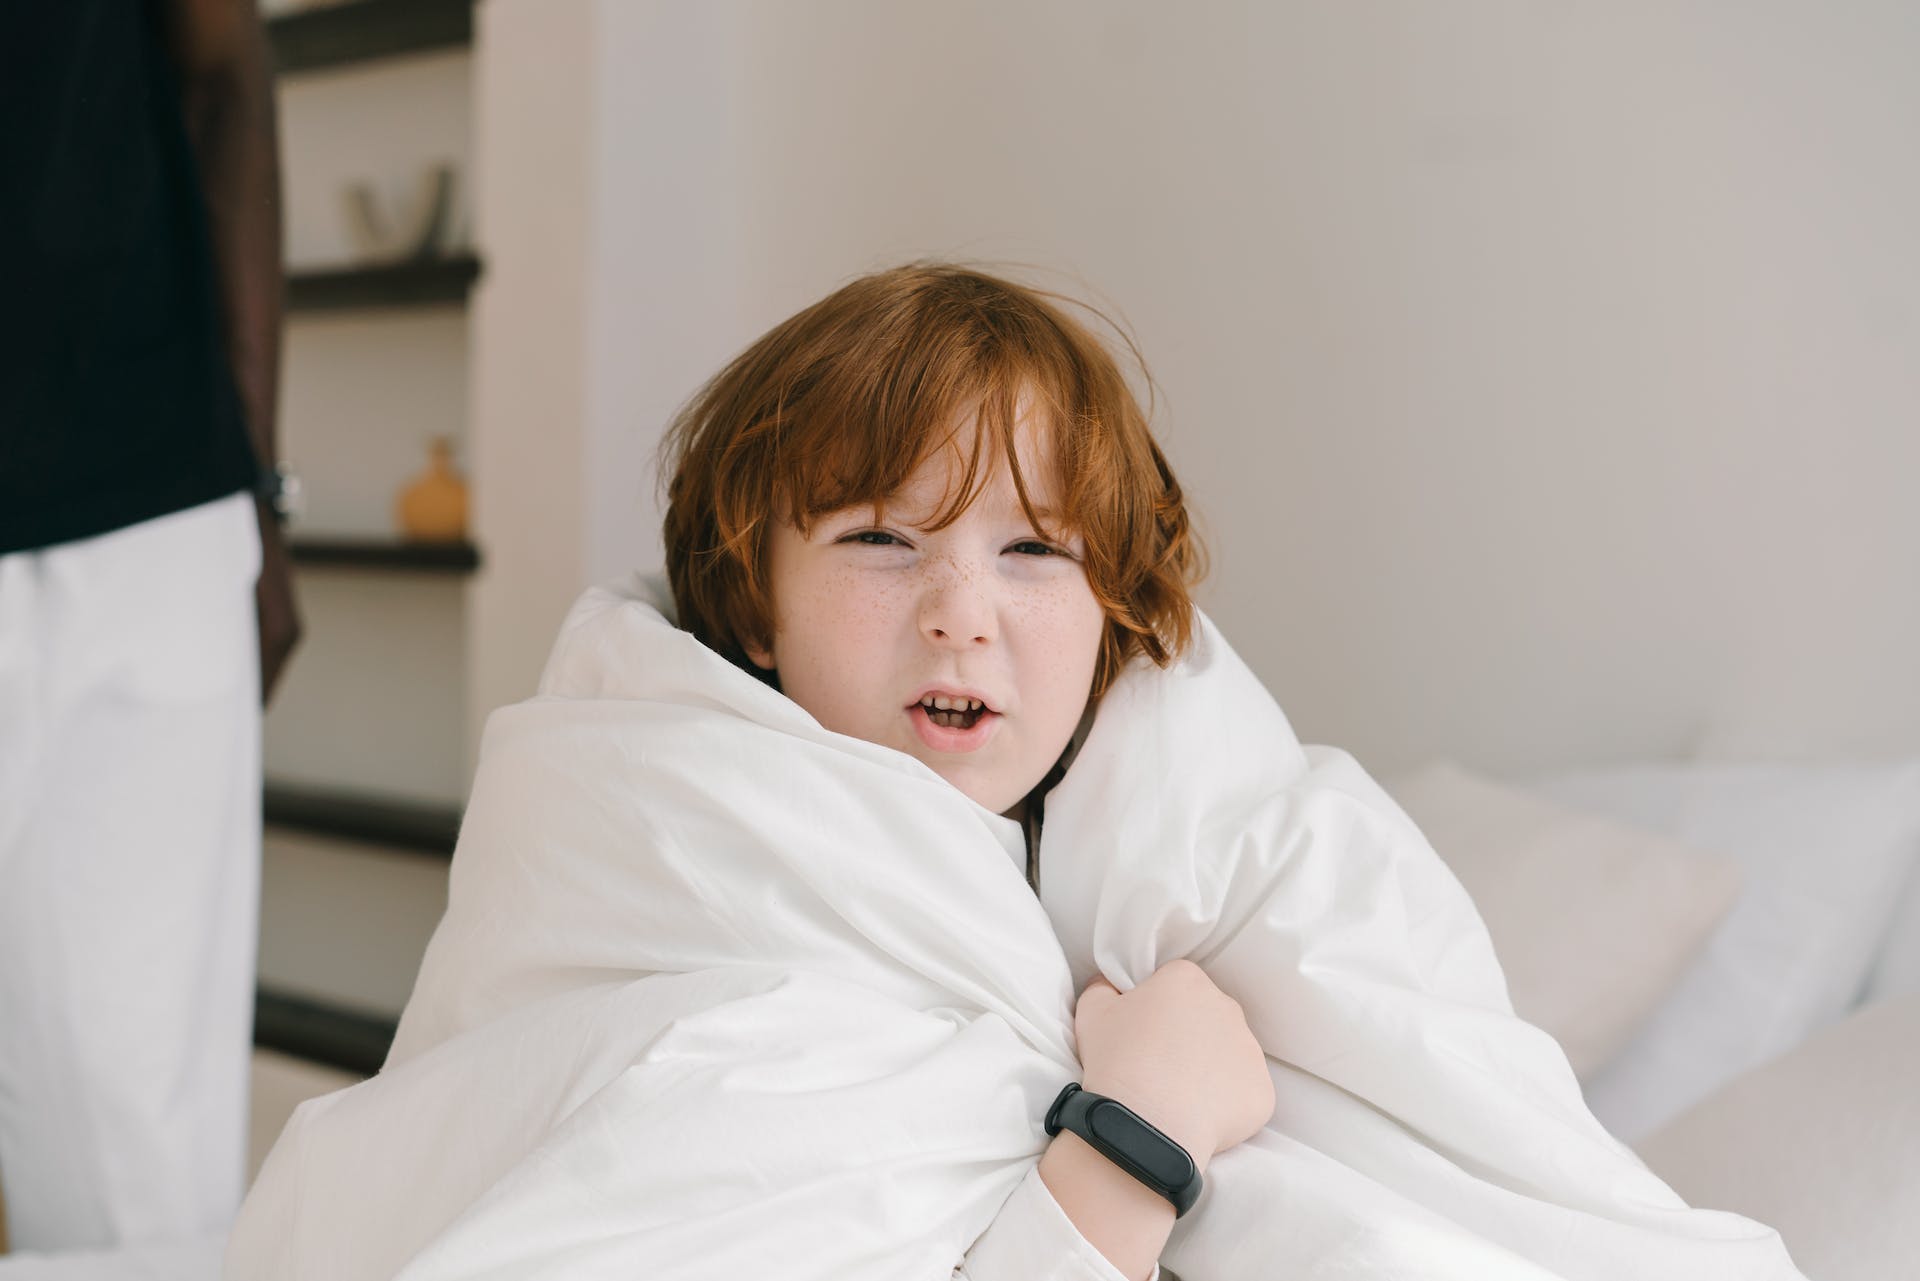 Little boy with red hair | Source: Pexels